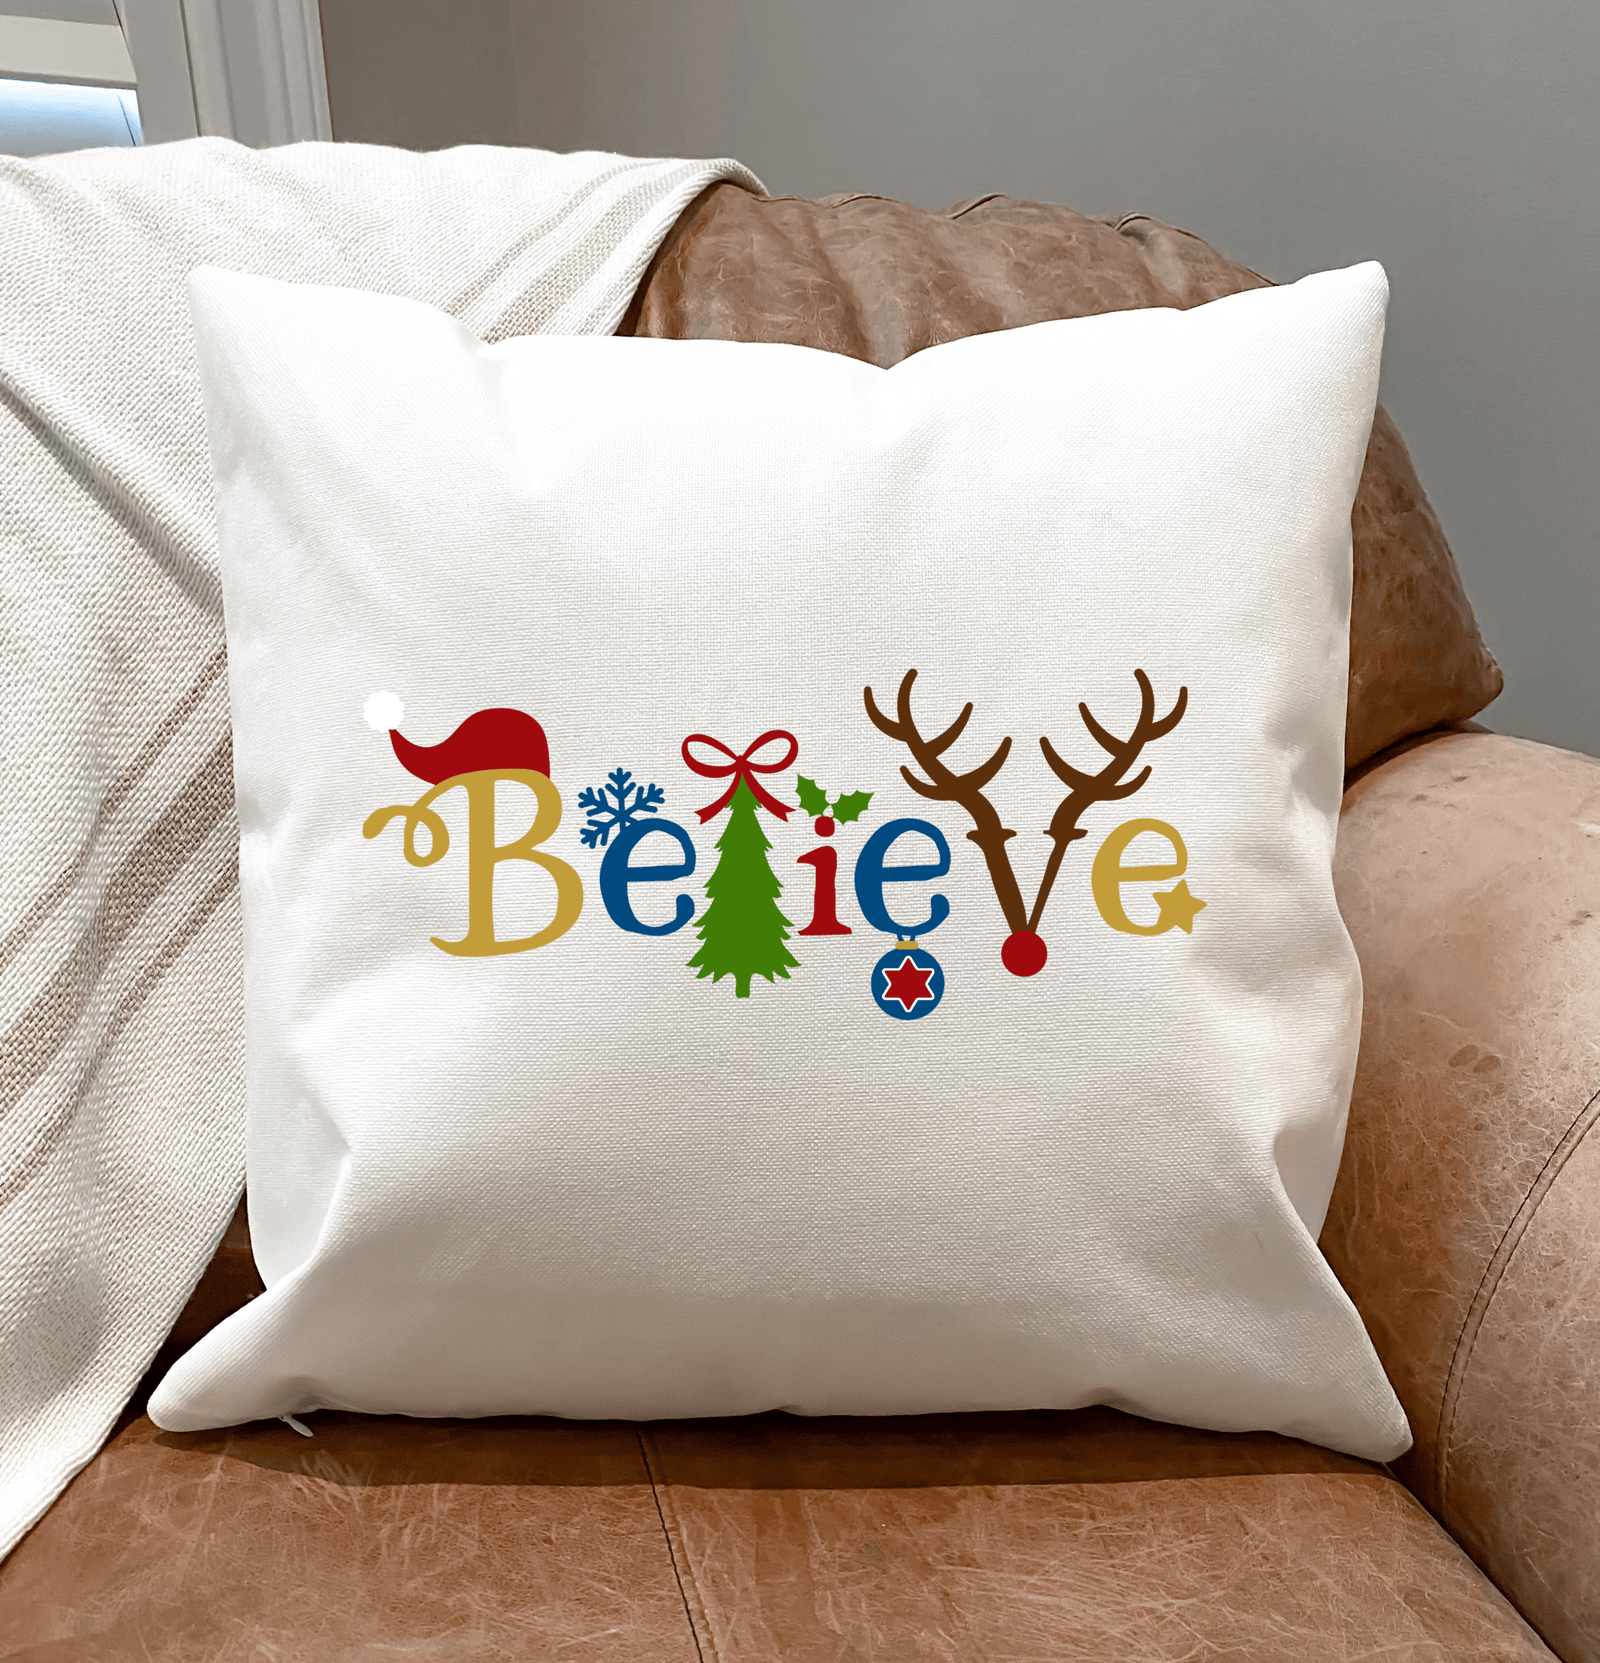 White Cute Printed Believe Fabric Pillow Cover